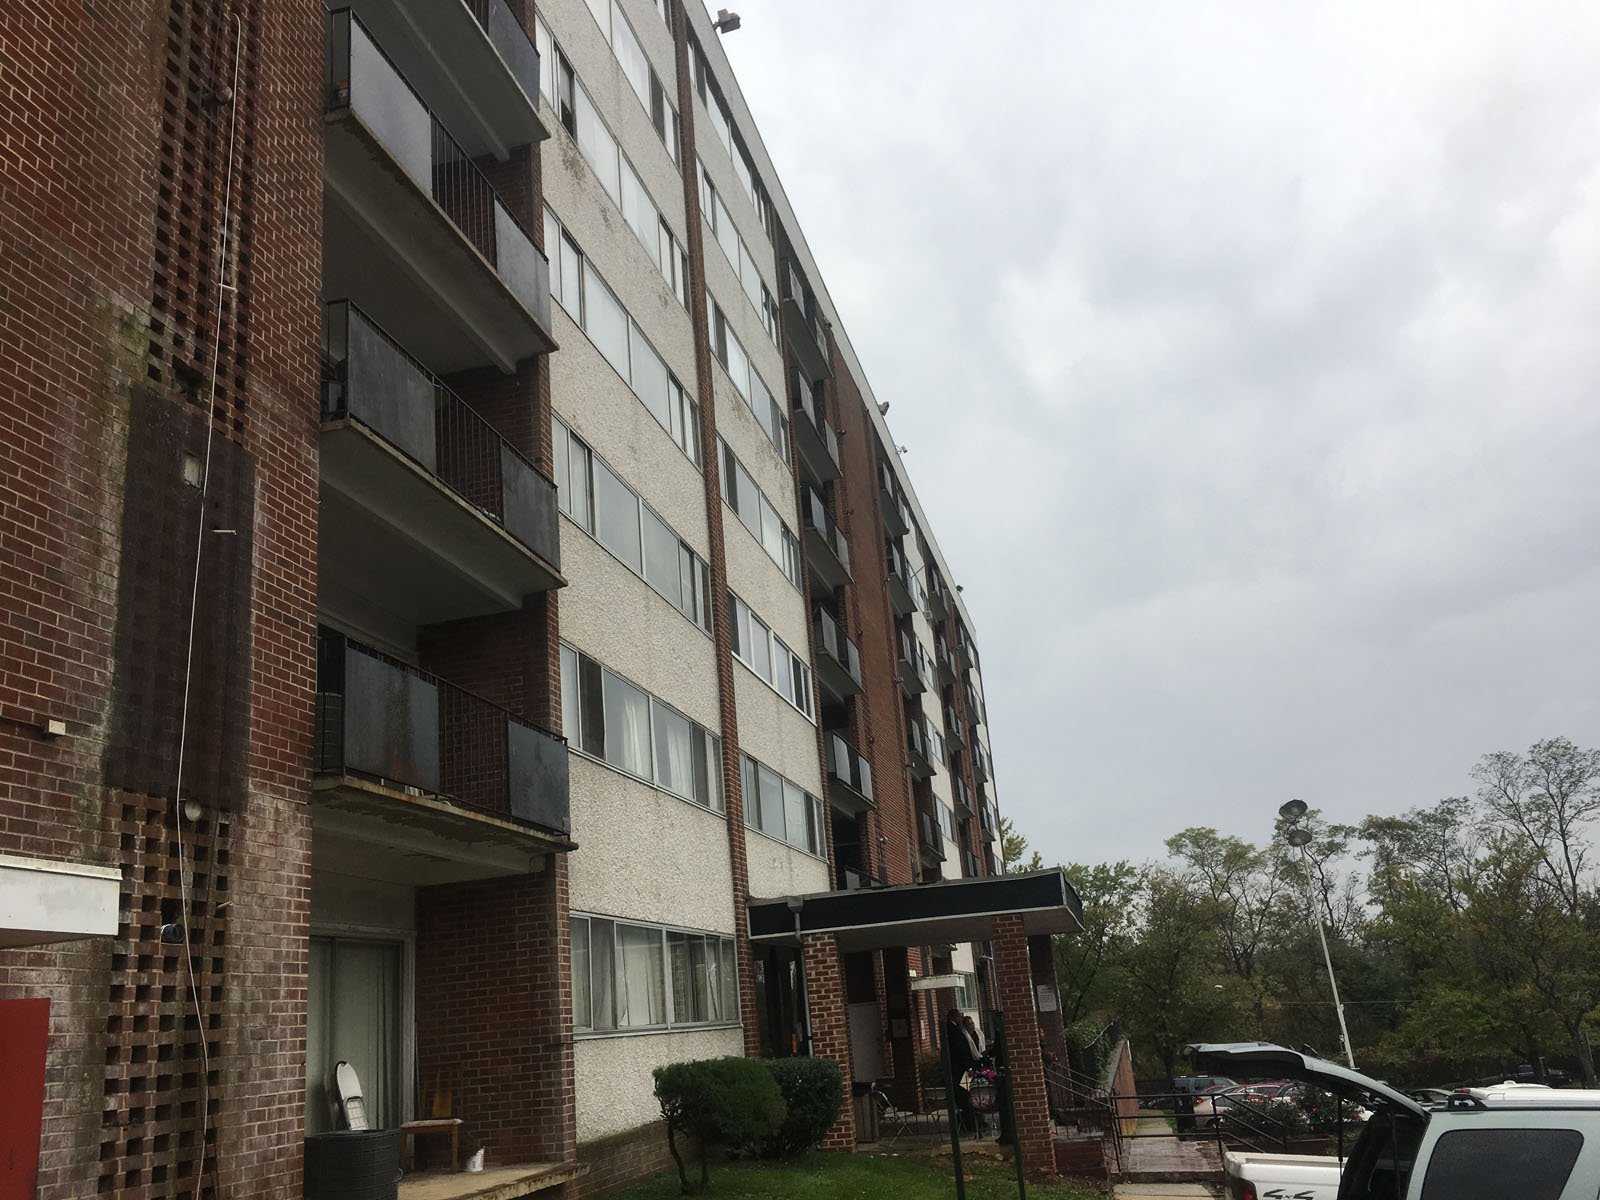 Although residents of the complex said utilities costs are included in their rent, Pepco and Washington Gas cut off service because the complex owes them more than $1 million. (WTOP/Mike Murillo)